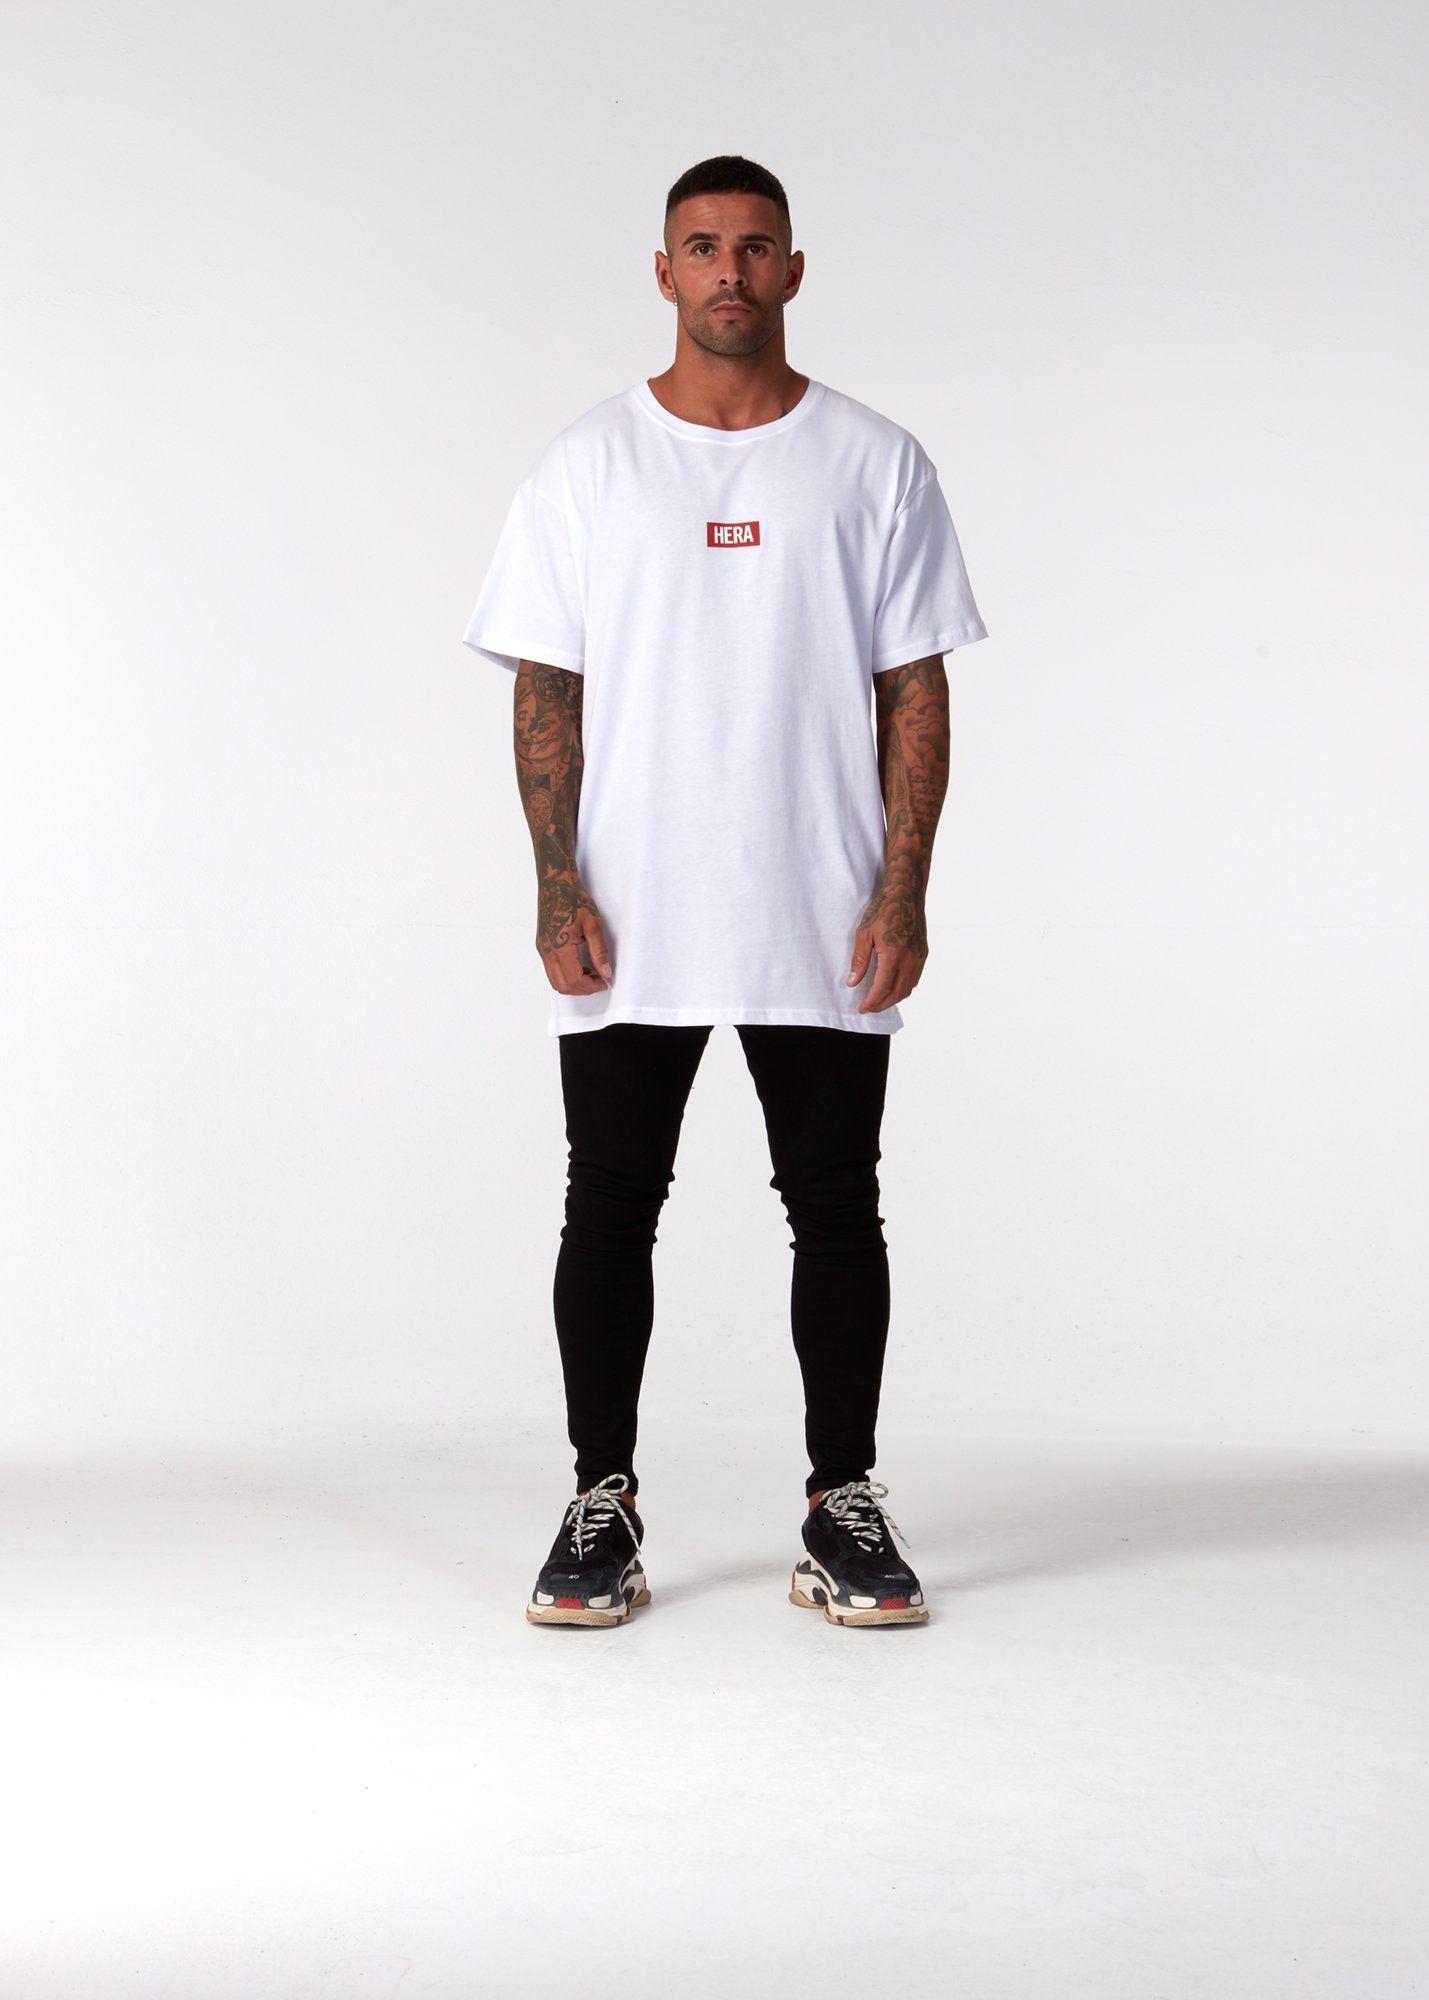 Red Person Logo - T-SHIRT - WHITE WITH RED BOX / FRONT BOX LOGO – HERA